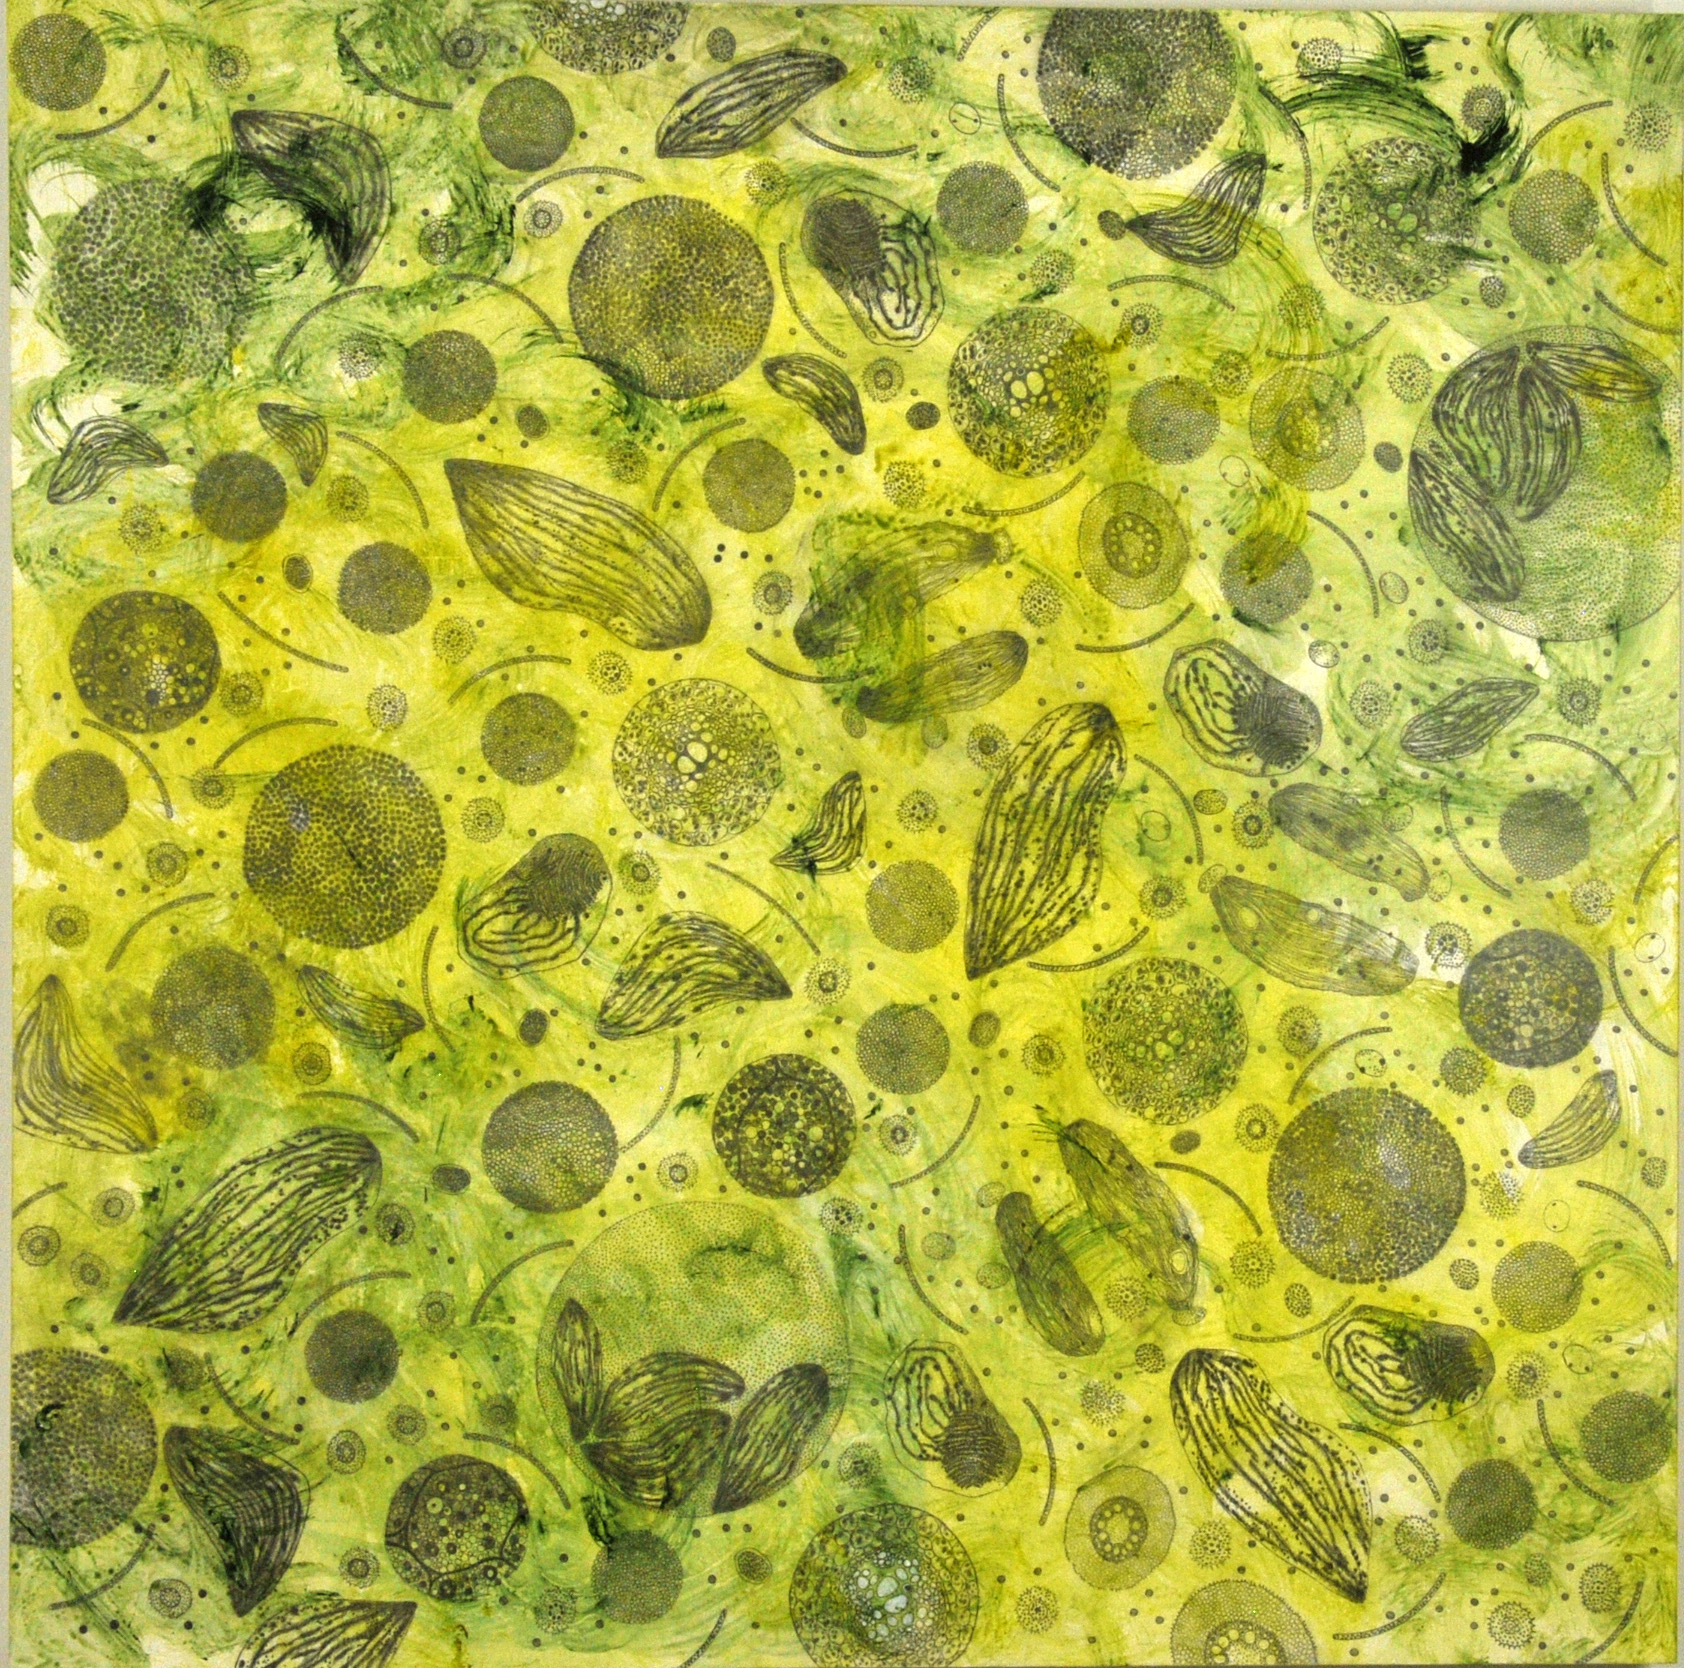   Plant Cell Patterns #3, acrylic and graphite on panel, 30x30   